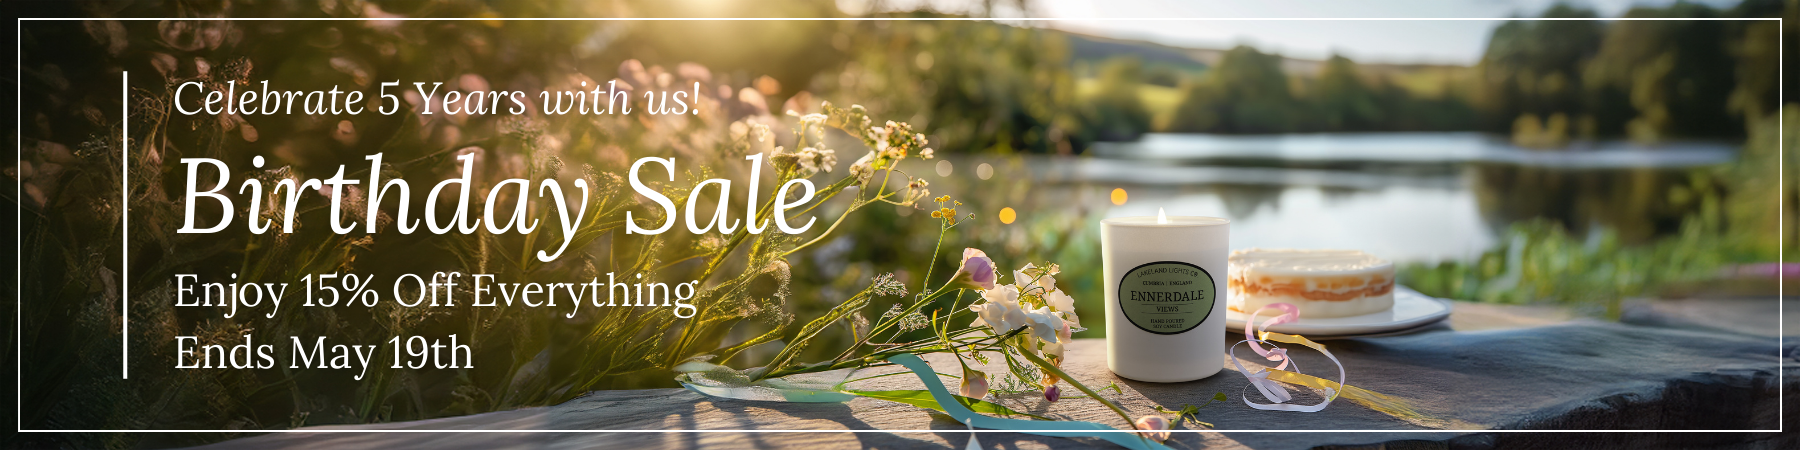 A Lakeland Lights luxury scented soy candle set in the beautiful Cumbrian scenery with a birthday cake behind to celebrate the company's 5th birthday. Text announces a sale lasting until 19th May with 15% off everything on the website